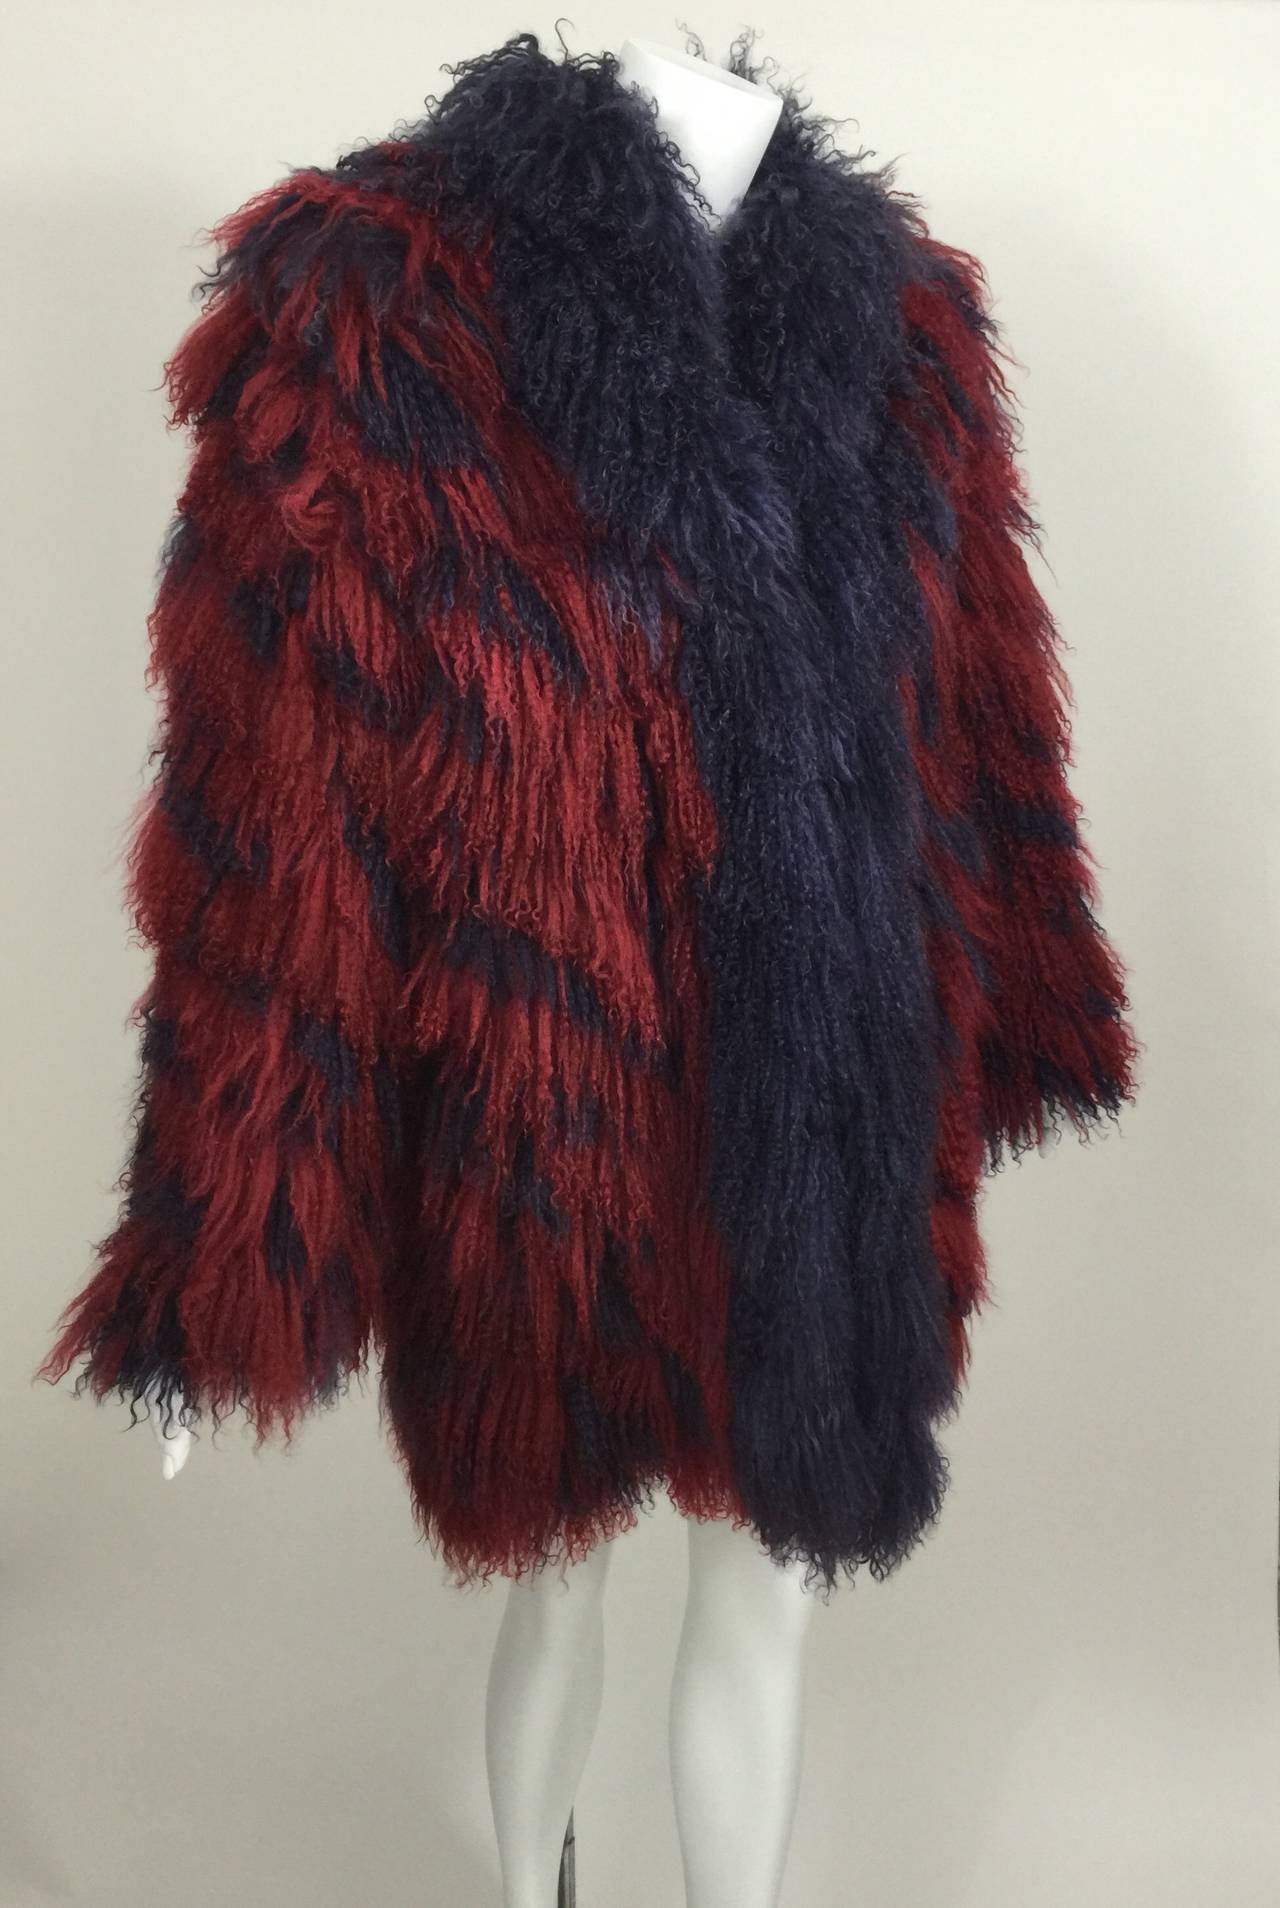 A shaggy Mongolian lamb fur coat in red and purple stripe. 
Fully lined.

Measurements:
Bust and Waist:  up to 40 inches
Length: 31 inches
Sleeve length: 24 inches
Shoulders: 18 inches